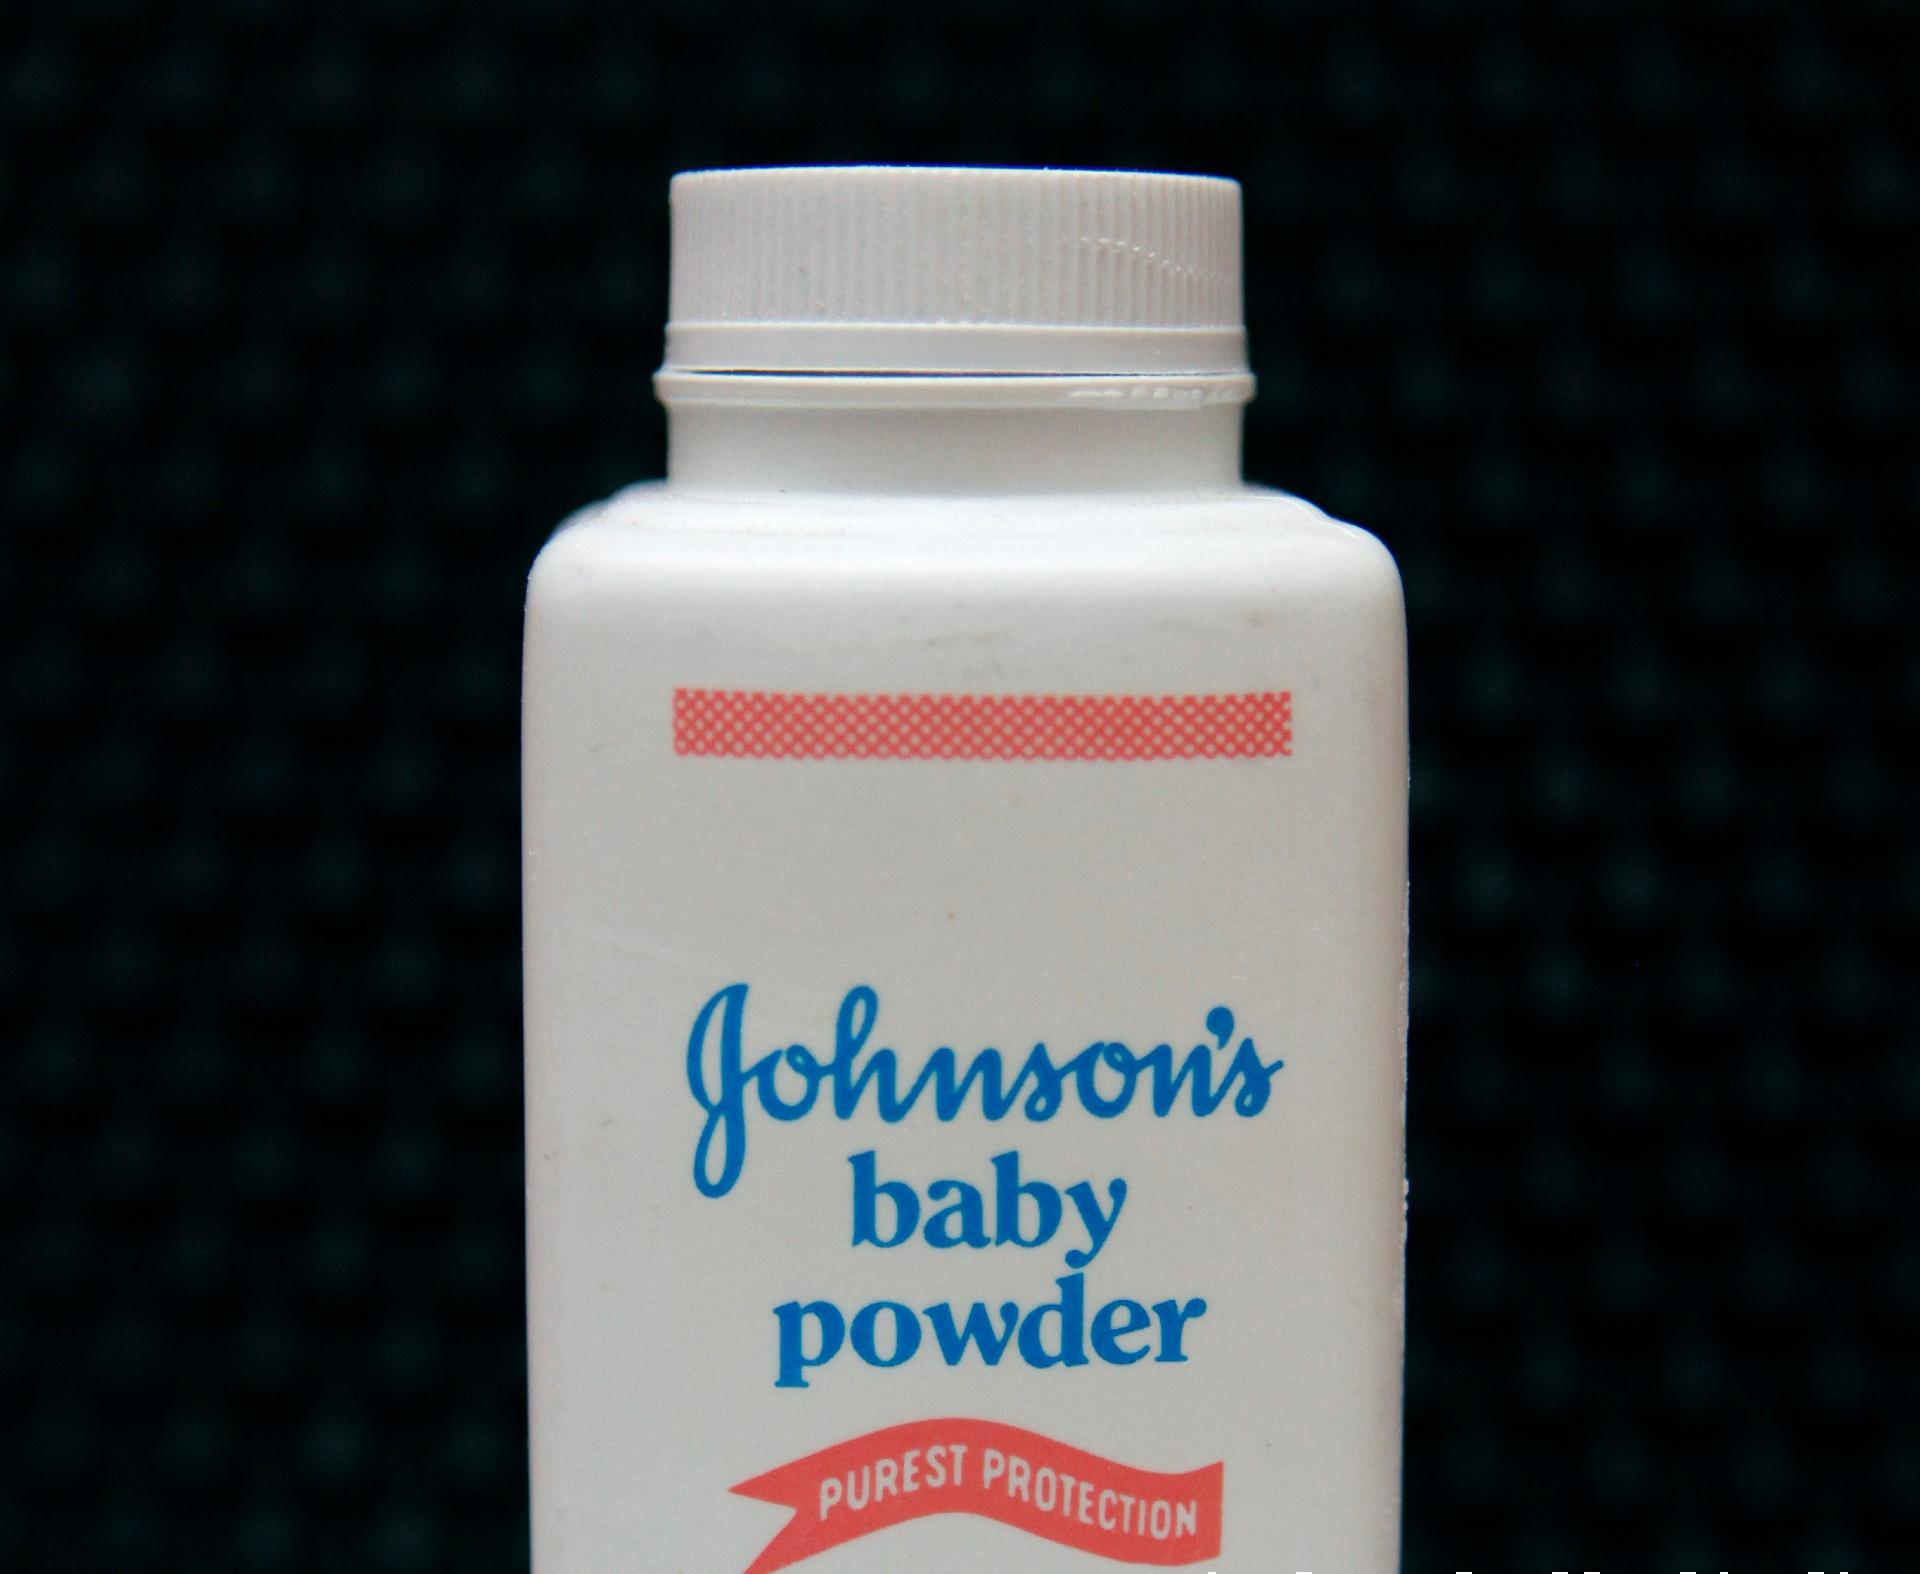 In this April 15, 2011, file photo, a bottle of Johnson’s baby powder is displayed. (AP Photo / Jeff Chiu, File)